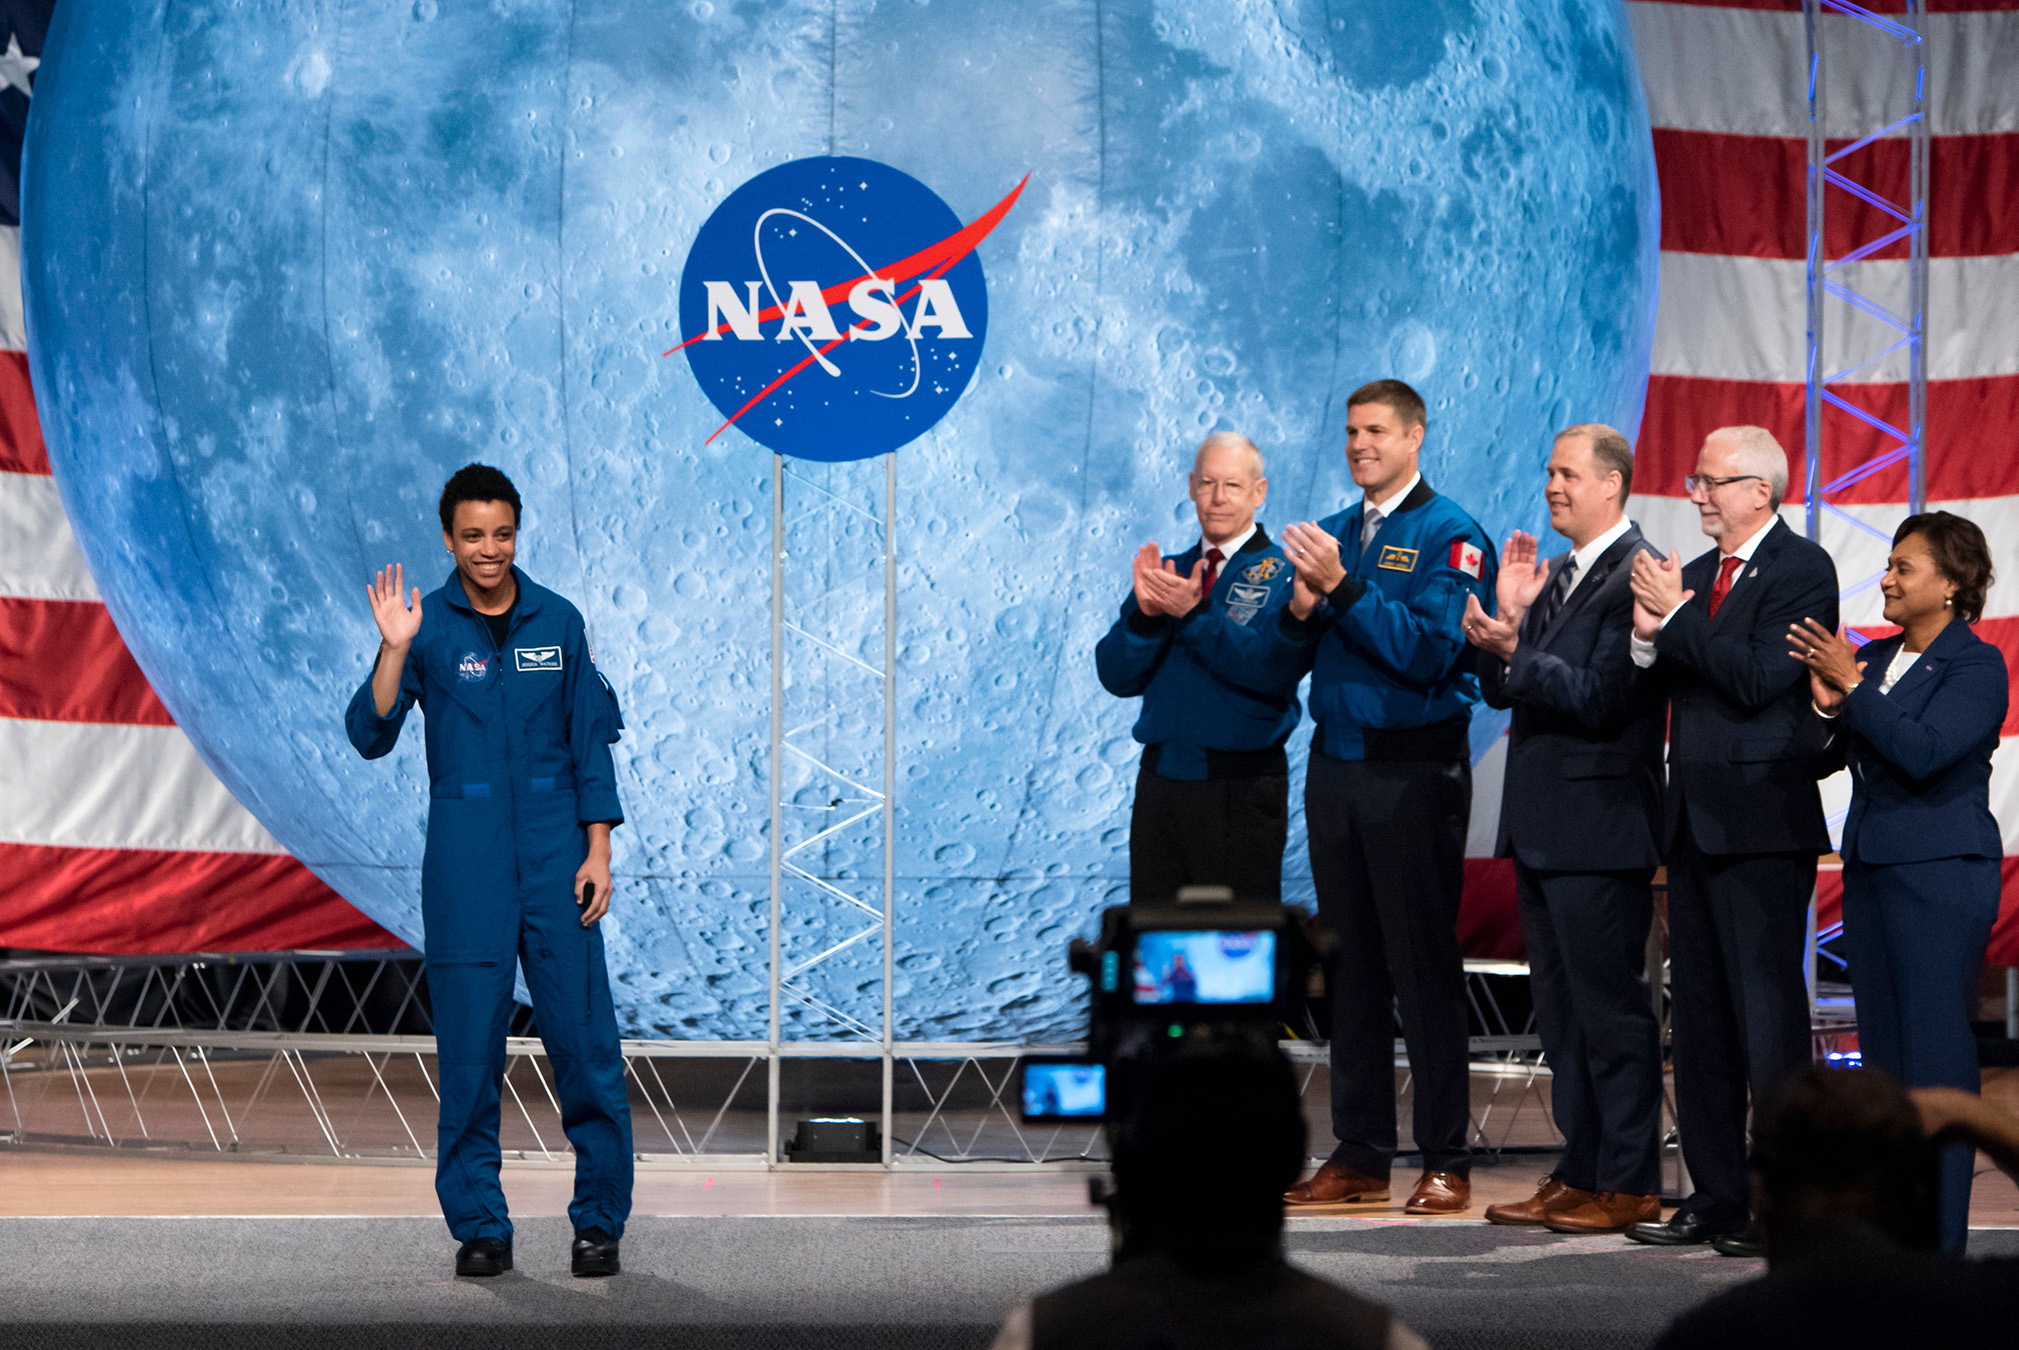 NASA astronaut Jessica Watkins waves at the audience during the astronaut graduation ceremony at Johnson Space Center in Houston Texas, on January 10, 2020.